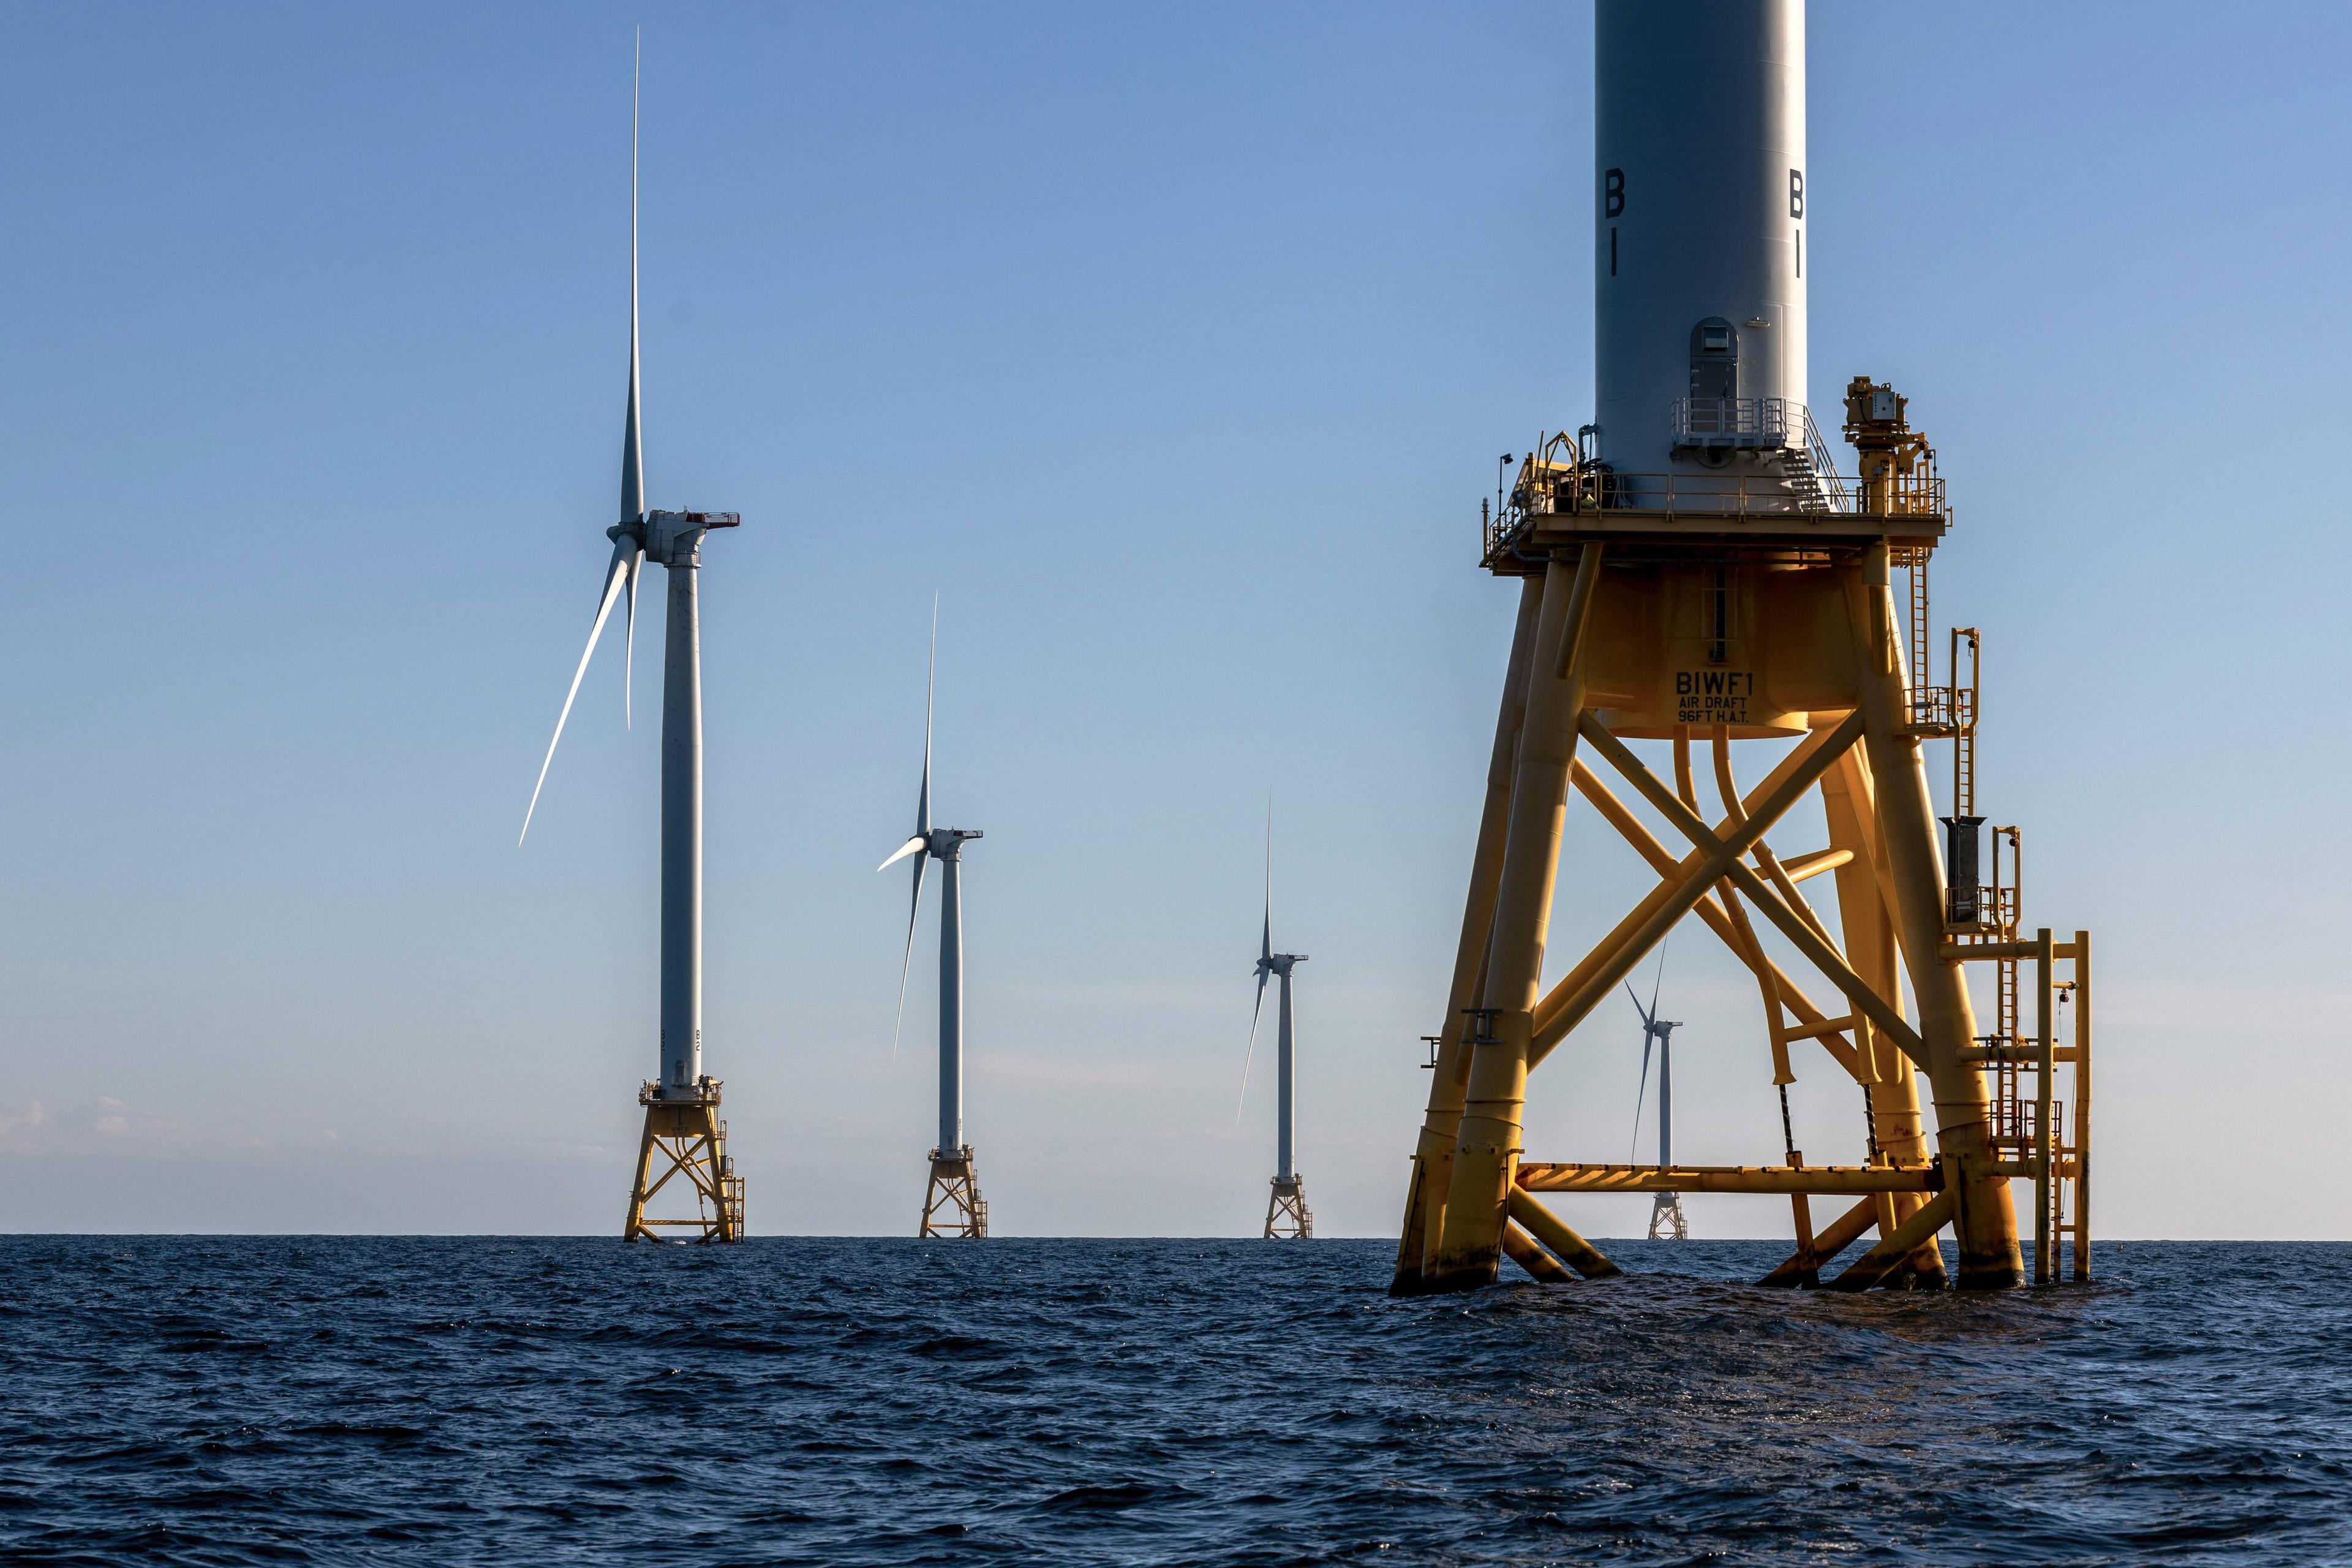 Supporters of Offshore Wind Projects Call for $1 Billion Bond to Upgrade Ports